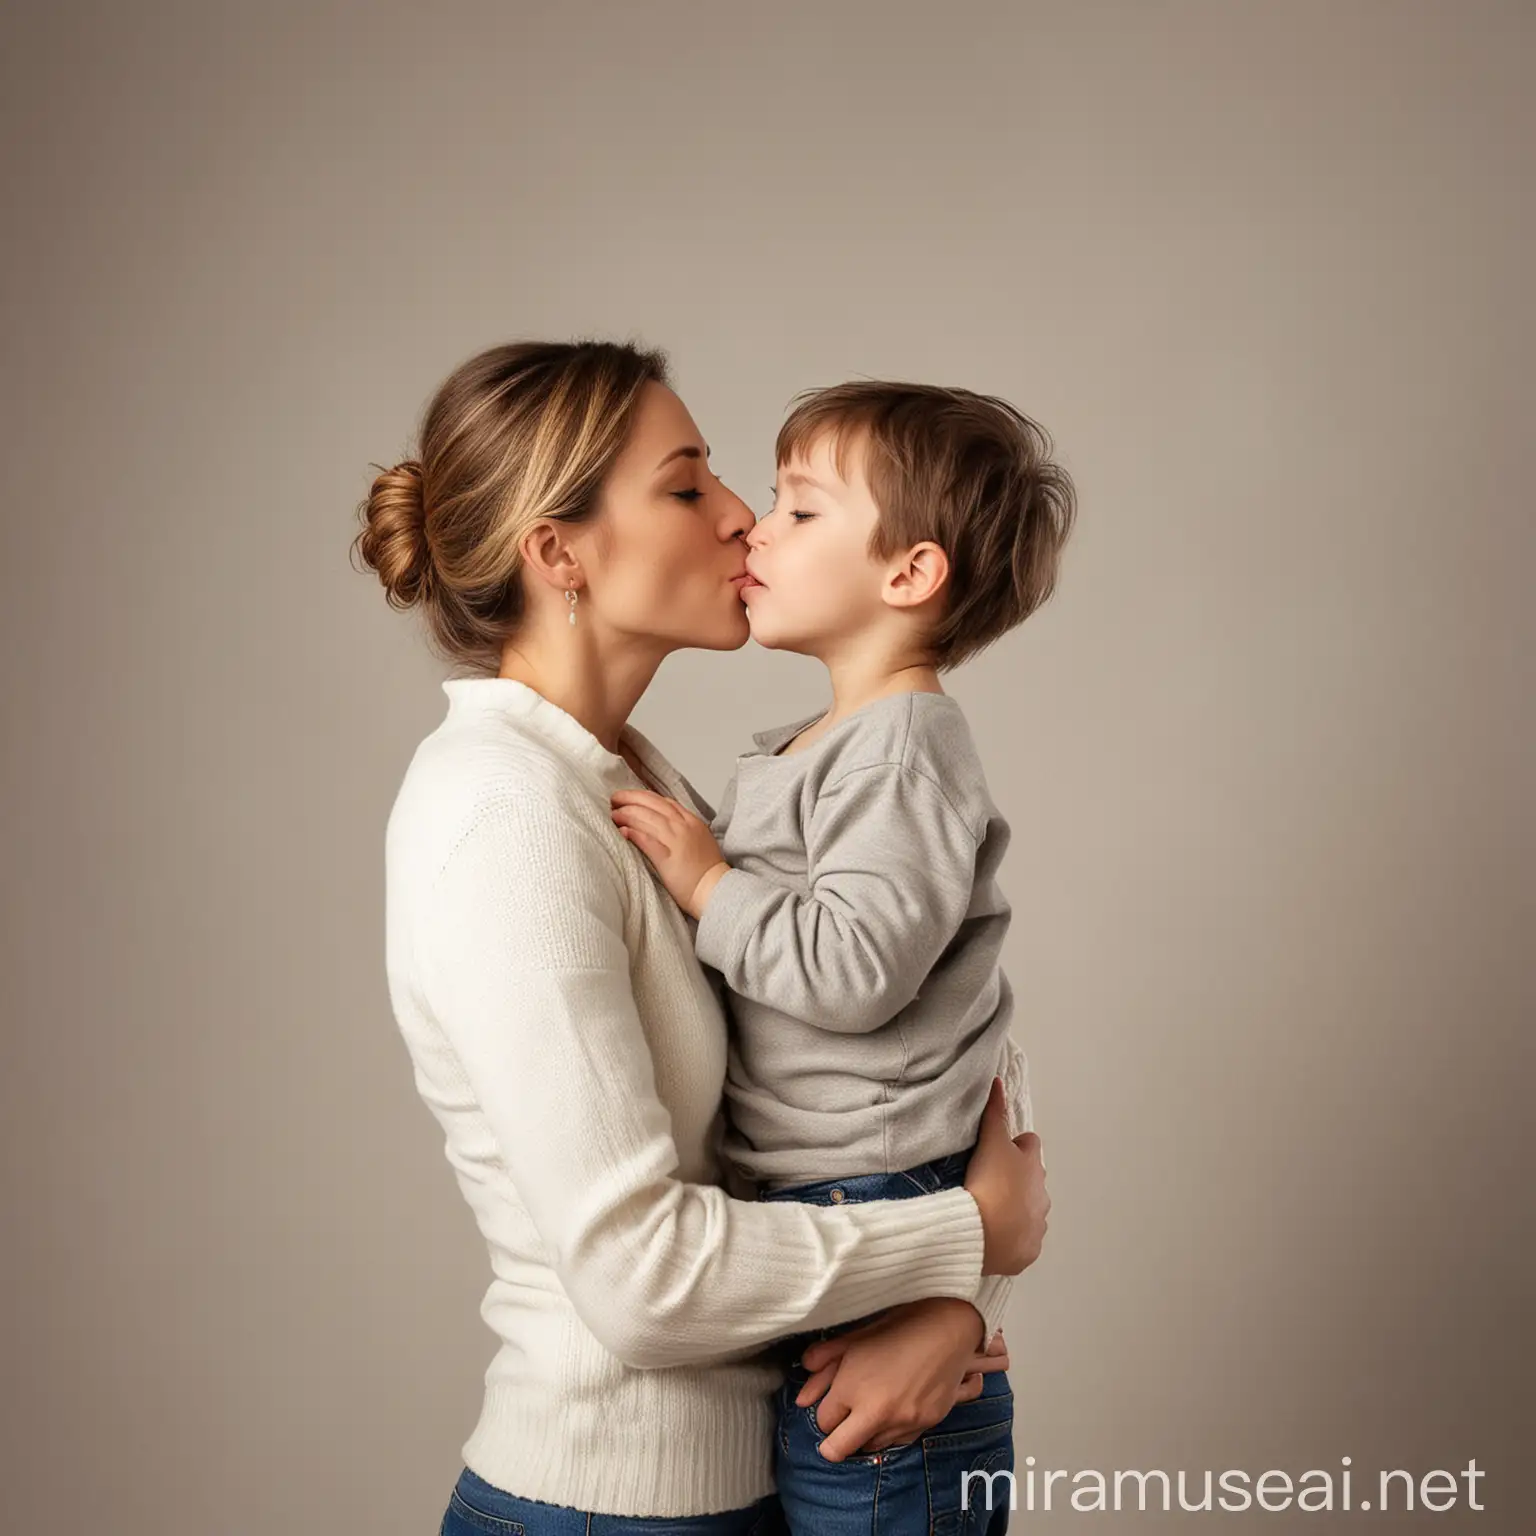 Mother and Son Embrace Sweet Affectionate Moment Captured